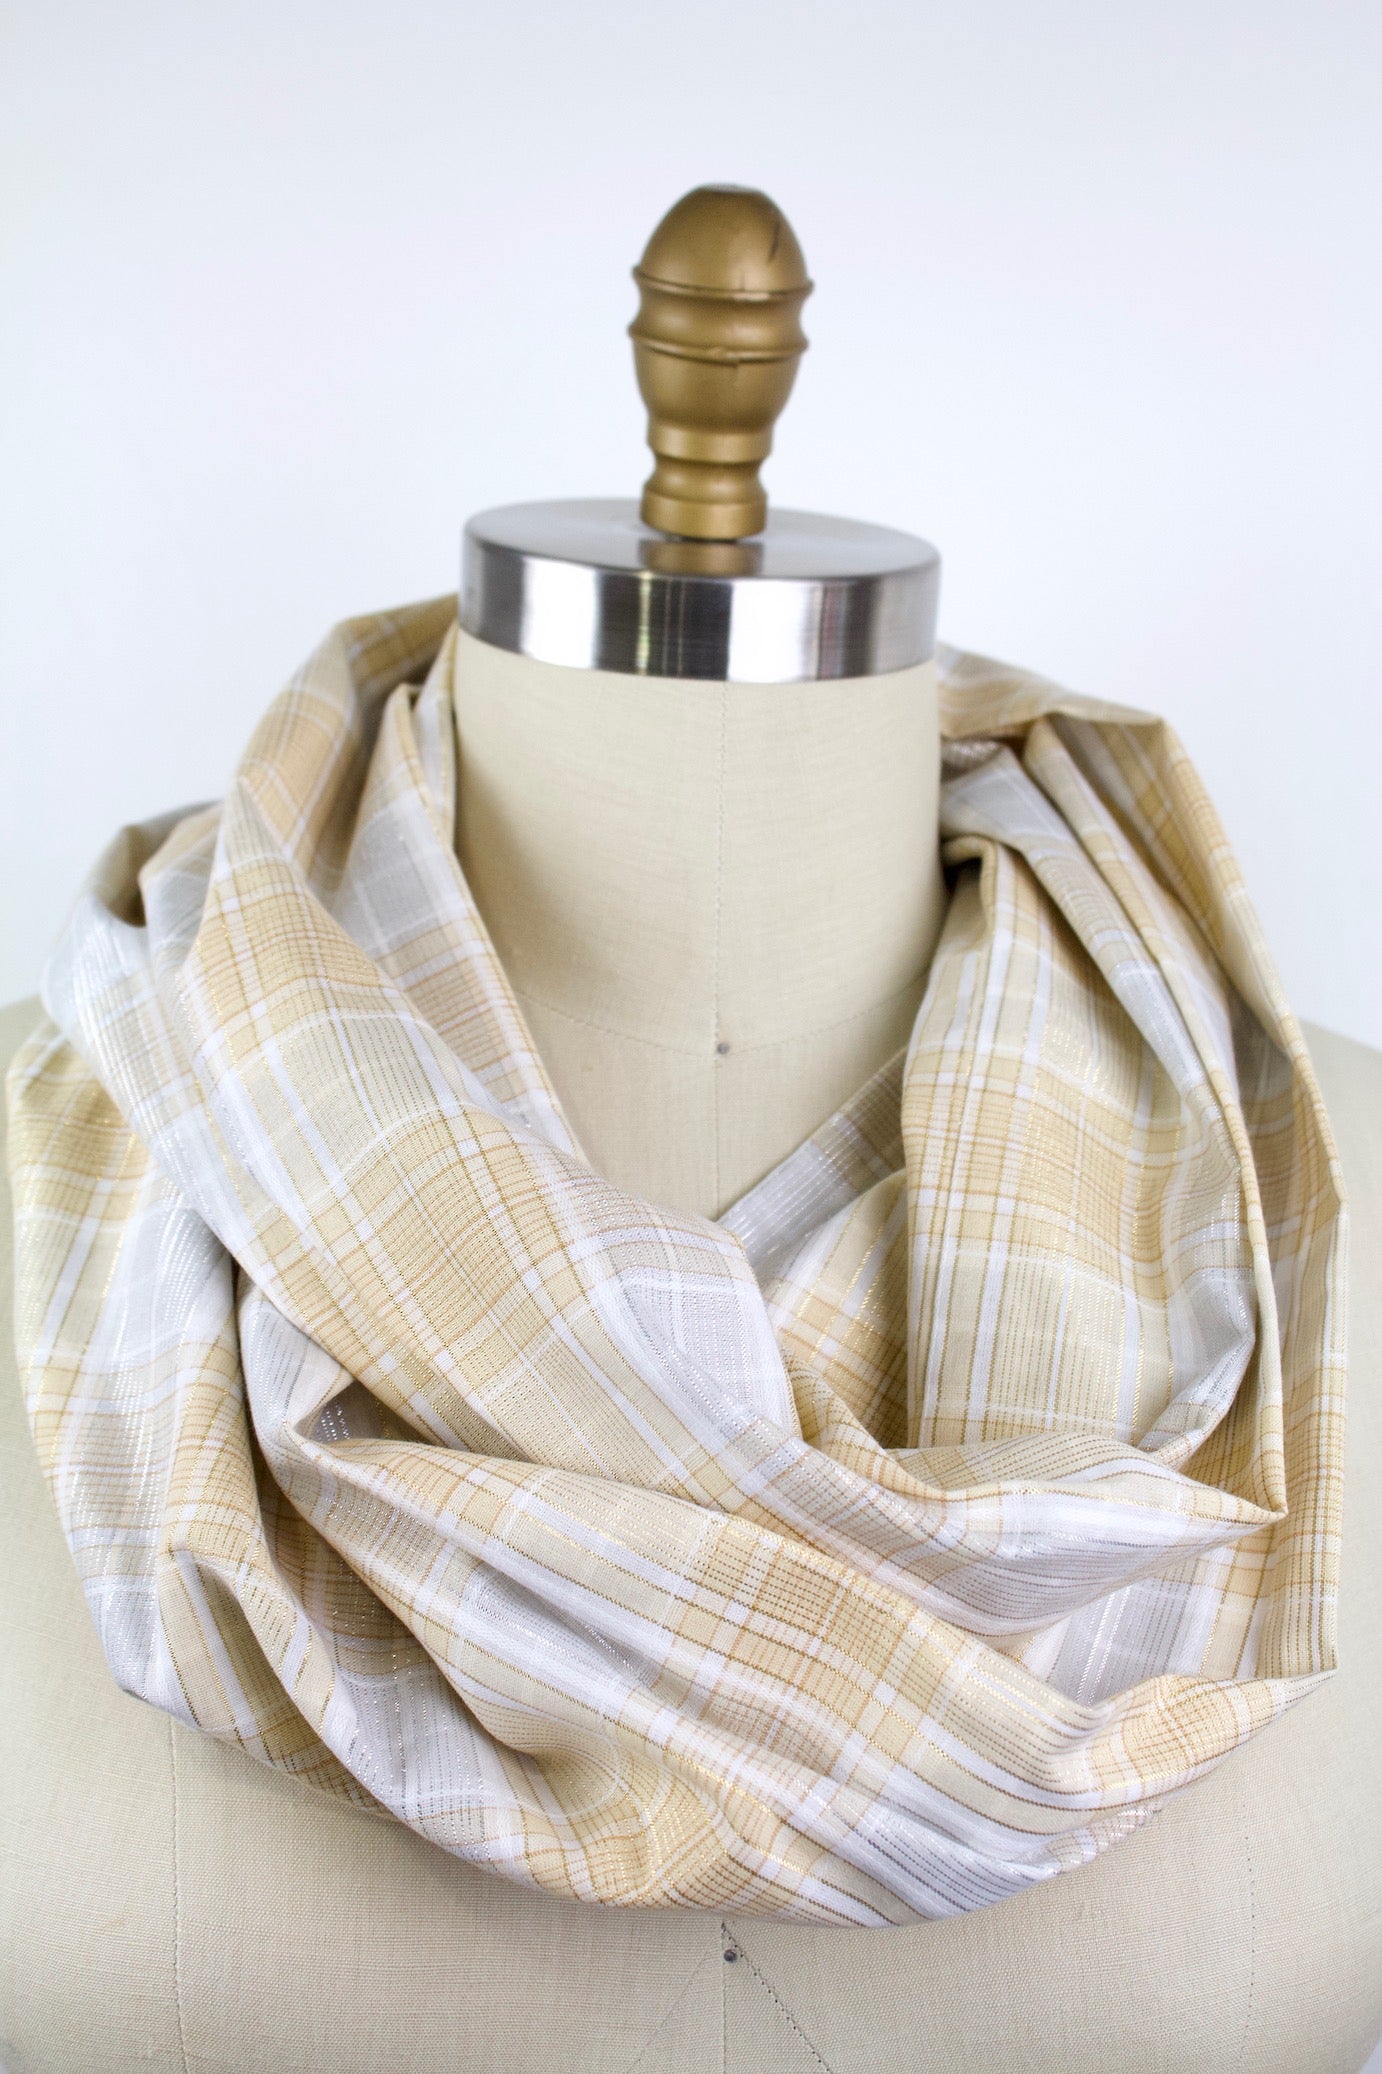 Metallic Plaid Infinity Scarf-The Blue Peony-Category_Infinity Scarf,Color_Cream,Color_Gold,Department_Personal Accessory,Material_Cotton,Pattern_Plaid